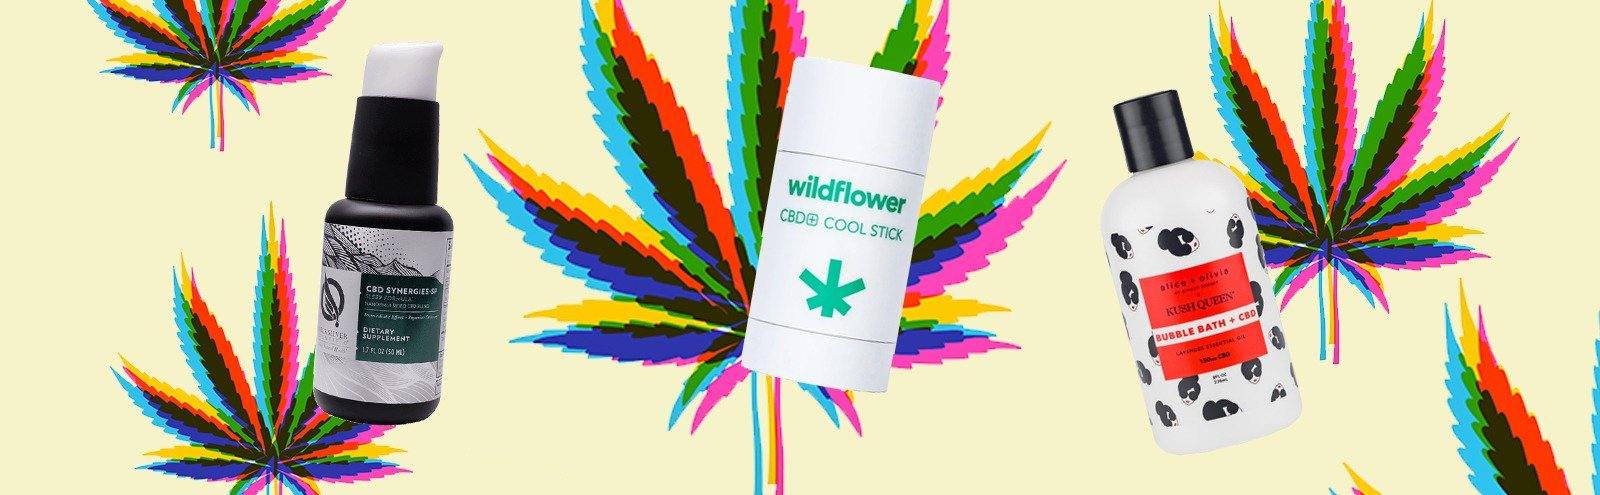 13 CBD PRODUCTS THAT PASS OUR TOUGHEST SCRUTINY - MAD TASTY